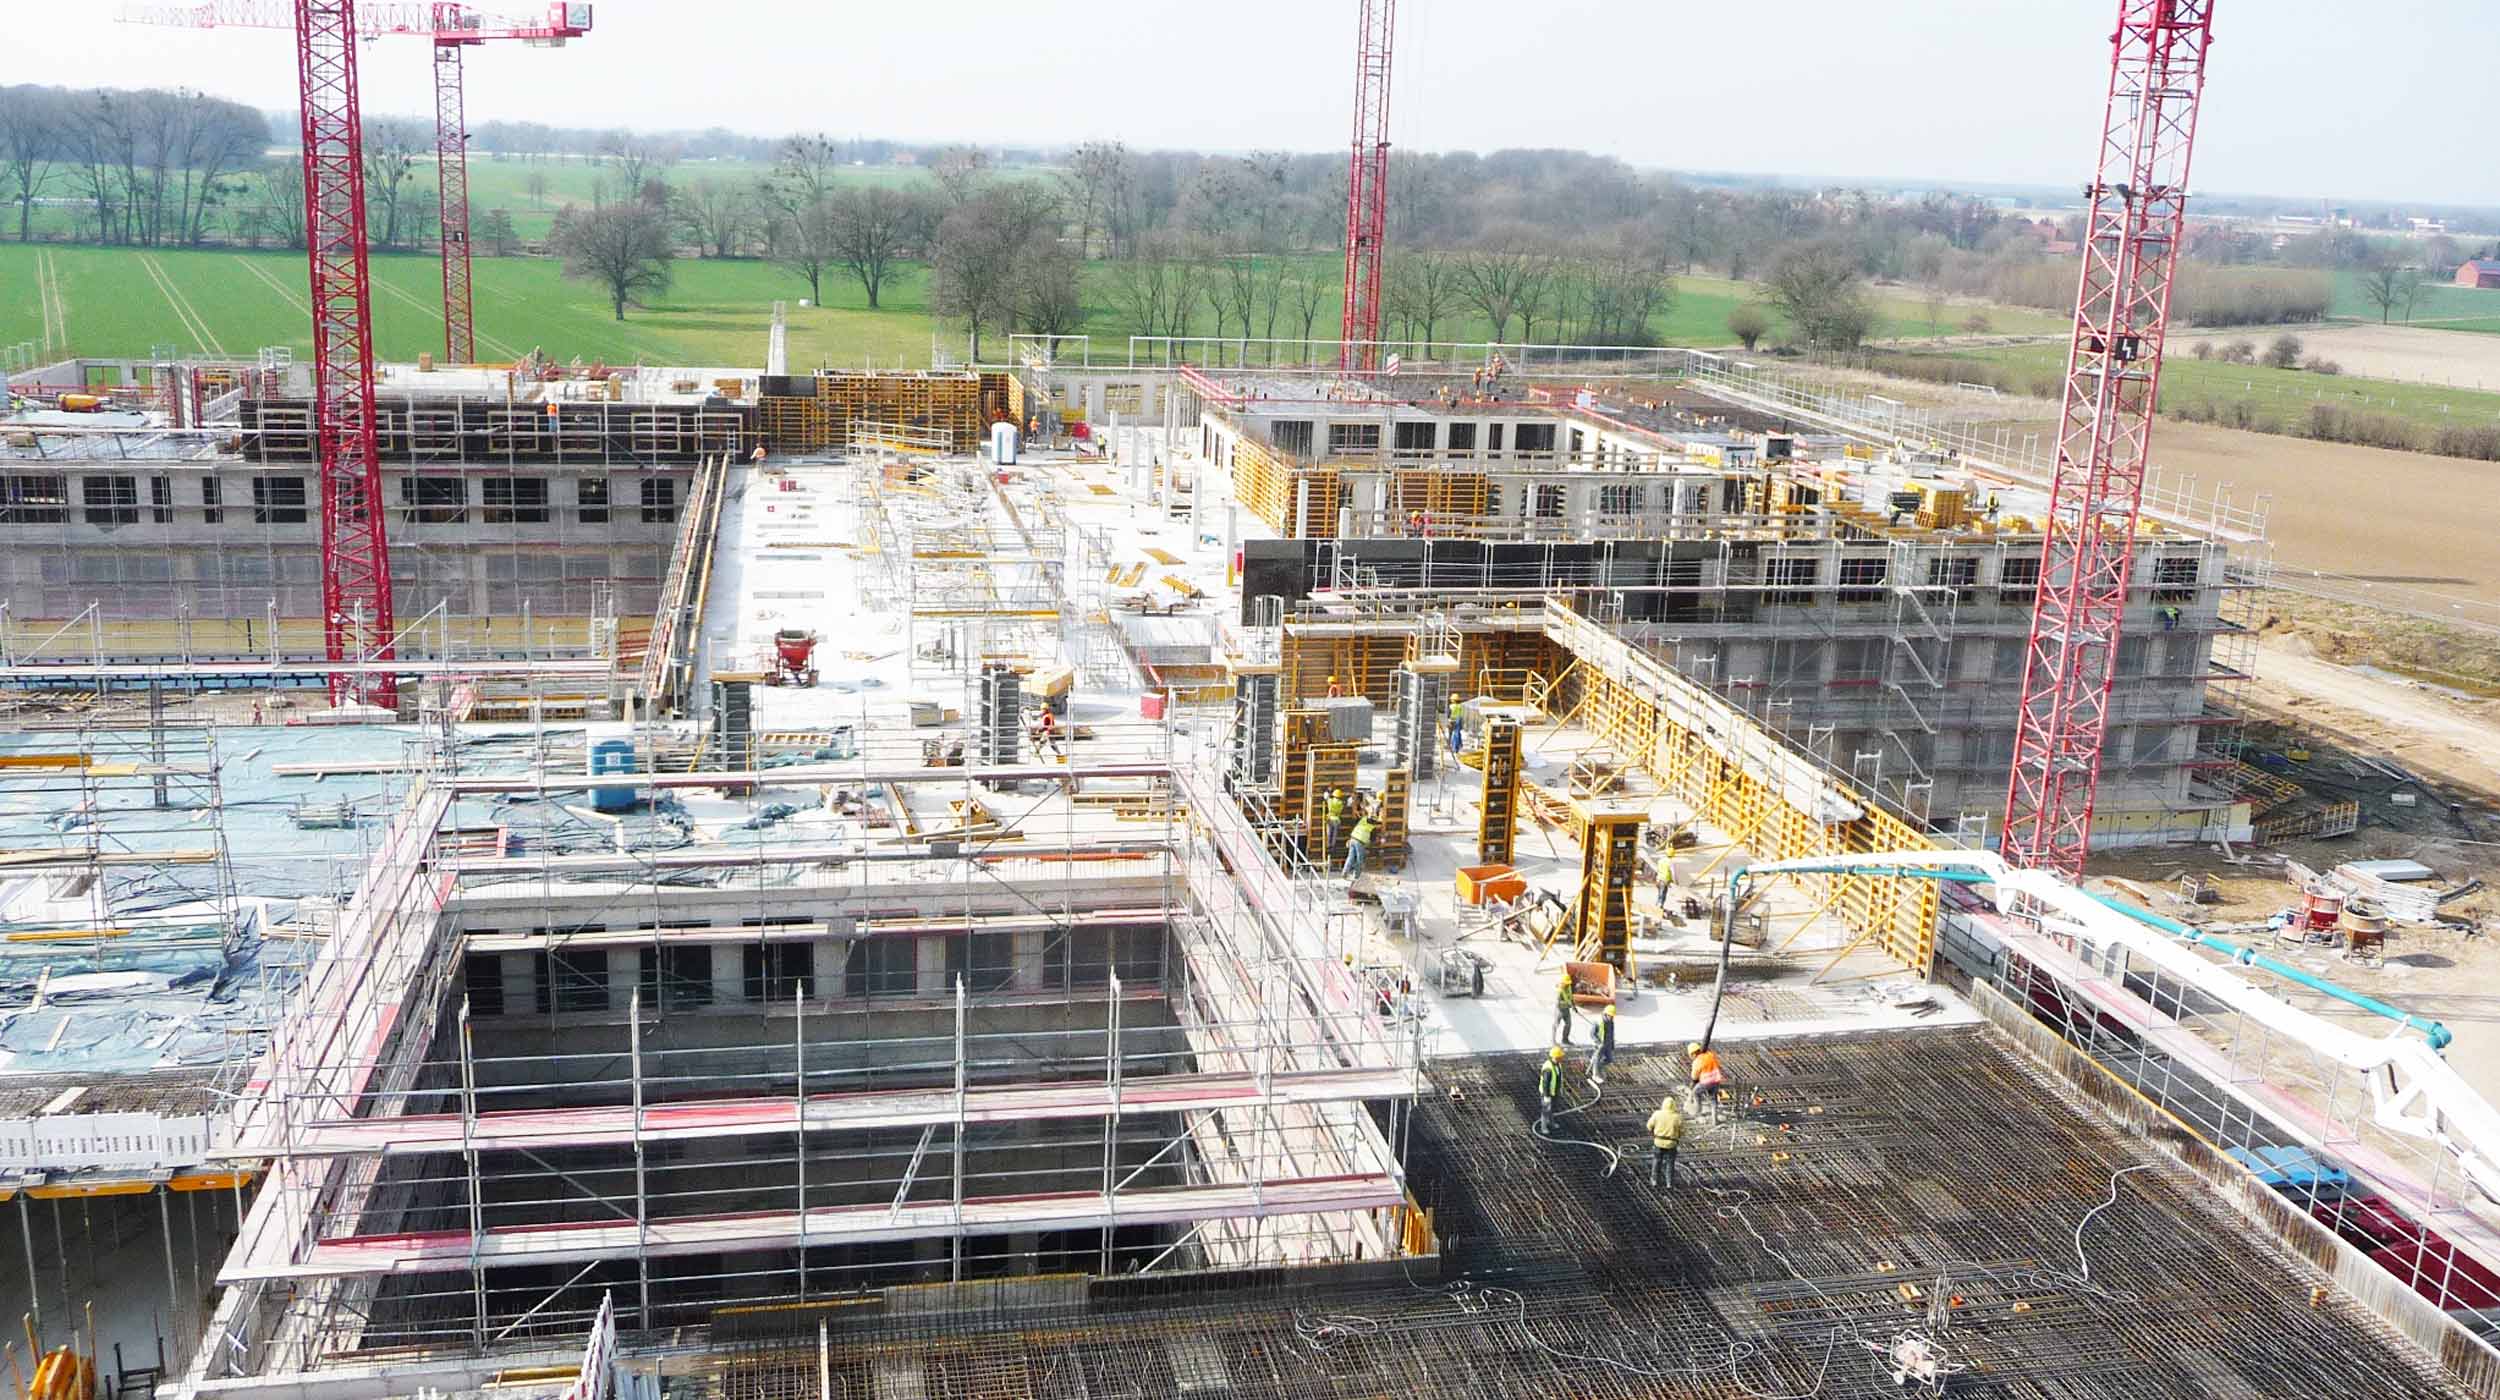 Using the CC-4 formwork system we were able to pour 30,000 m³ of concrete in situ in little more than 6 months, working under tight deadlines with demanding quality standards.